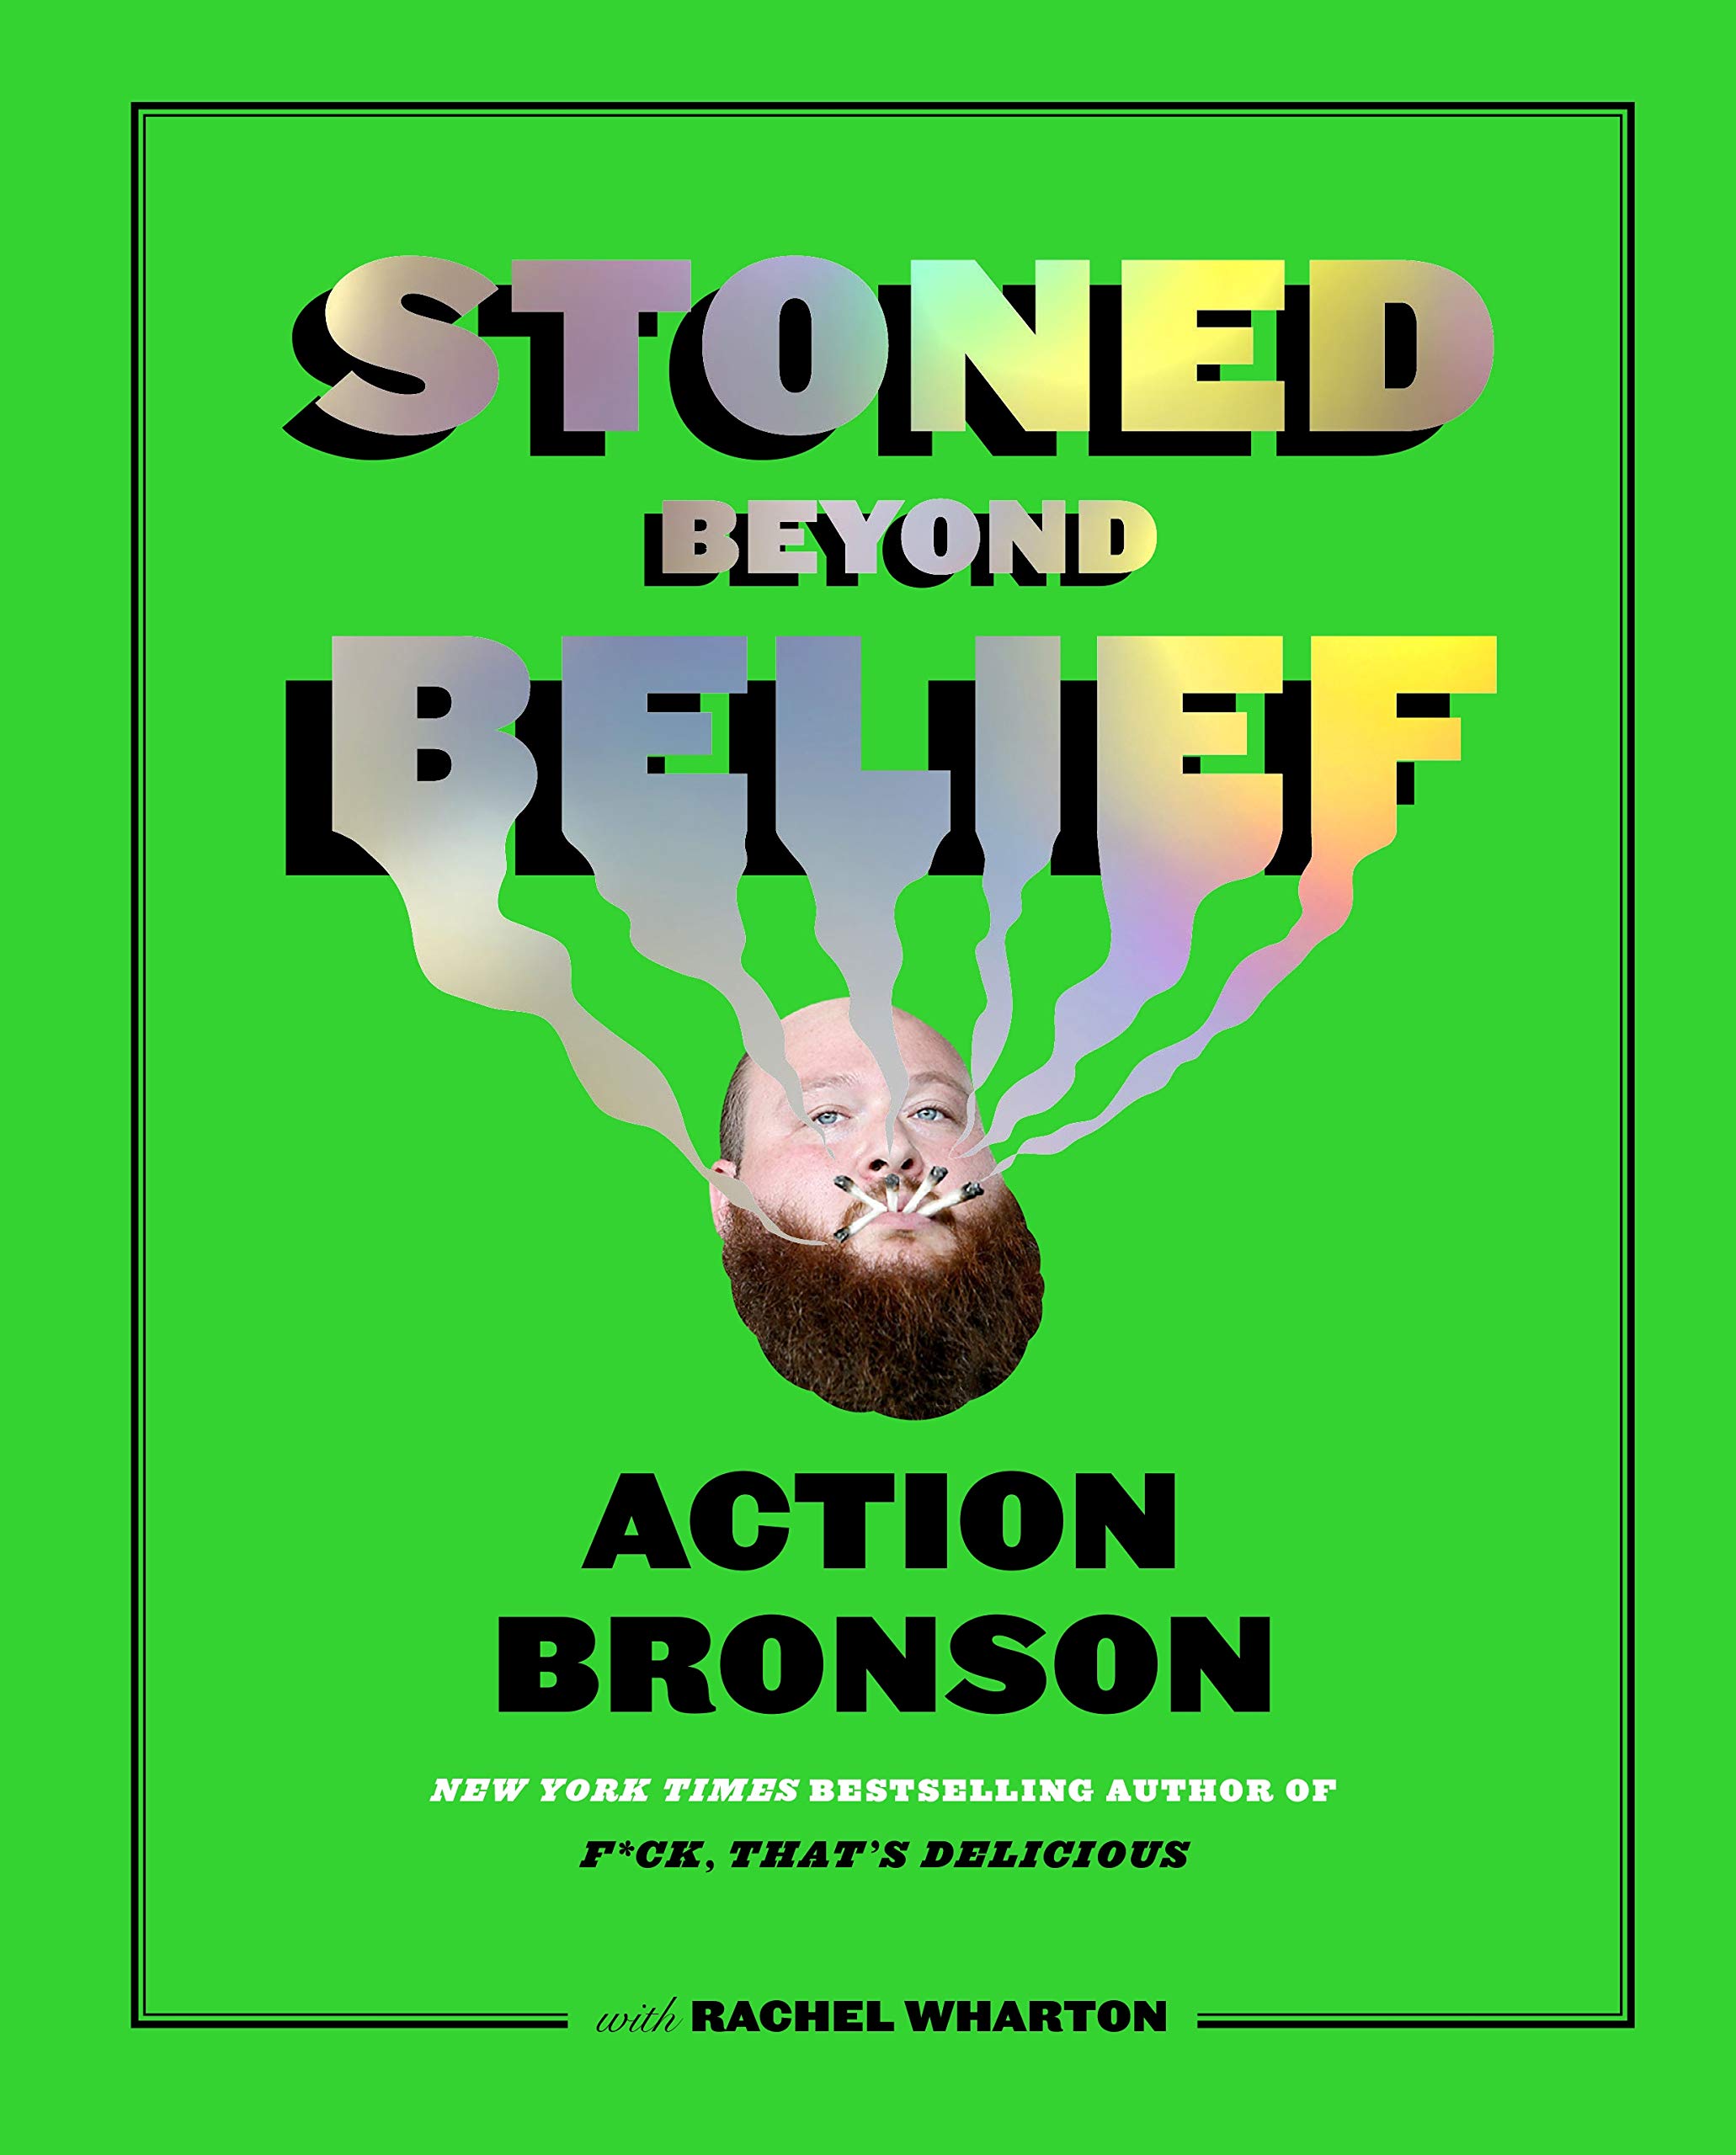 One of the most entertaining books from Action Bronson